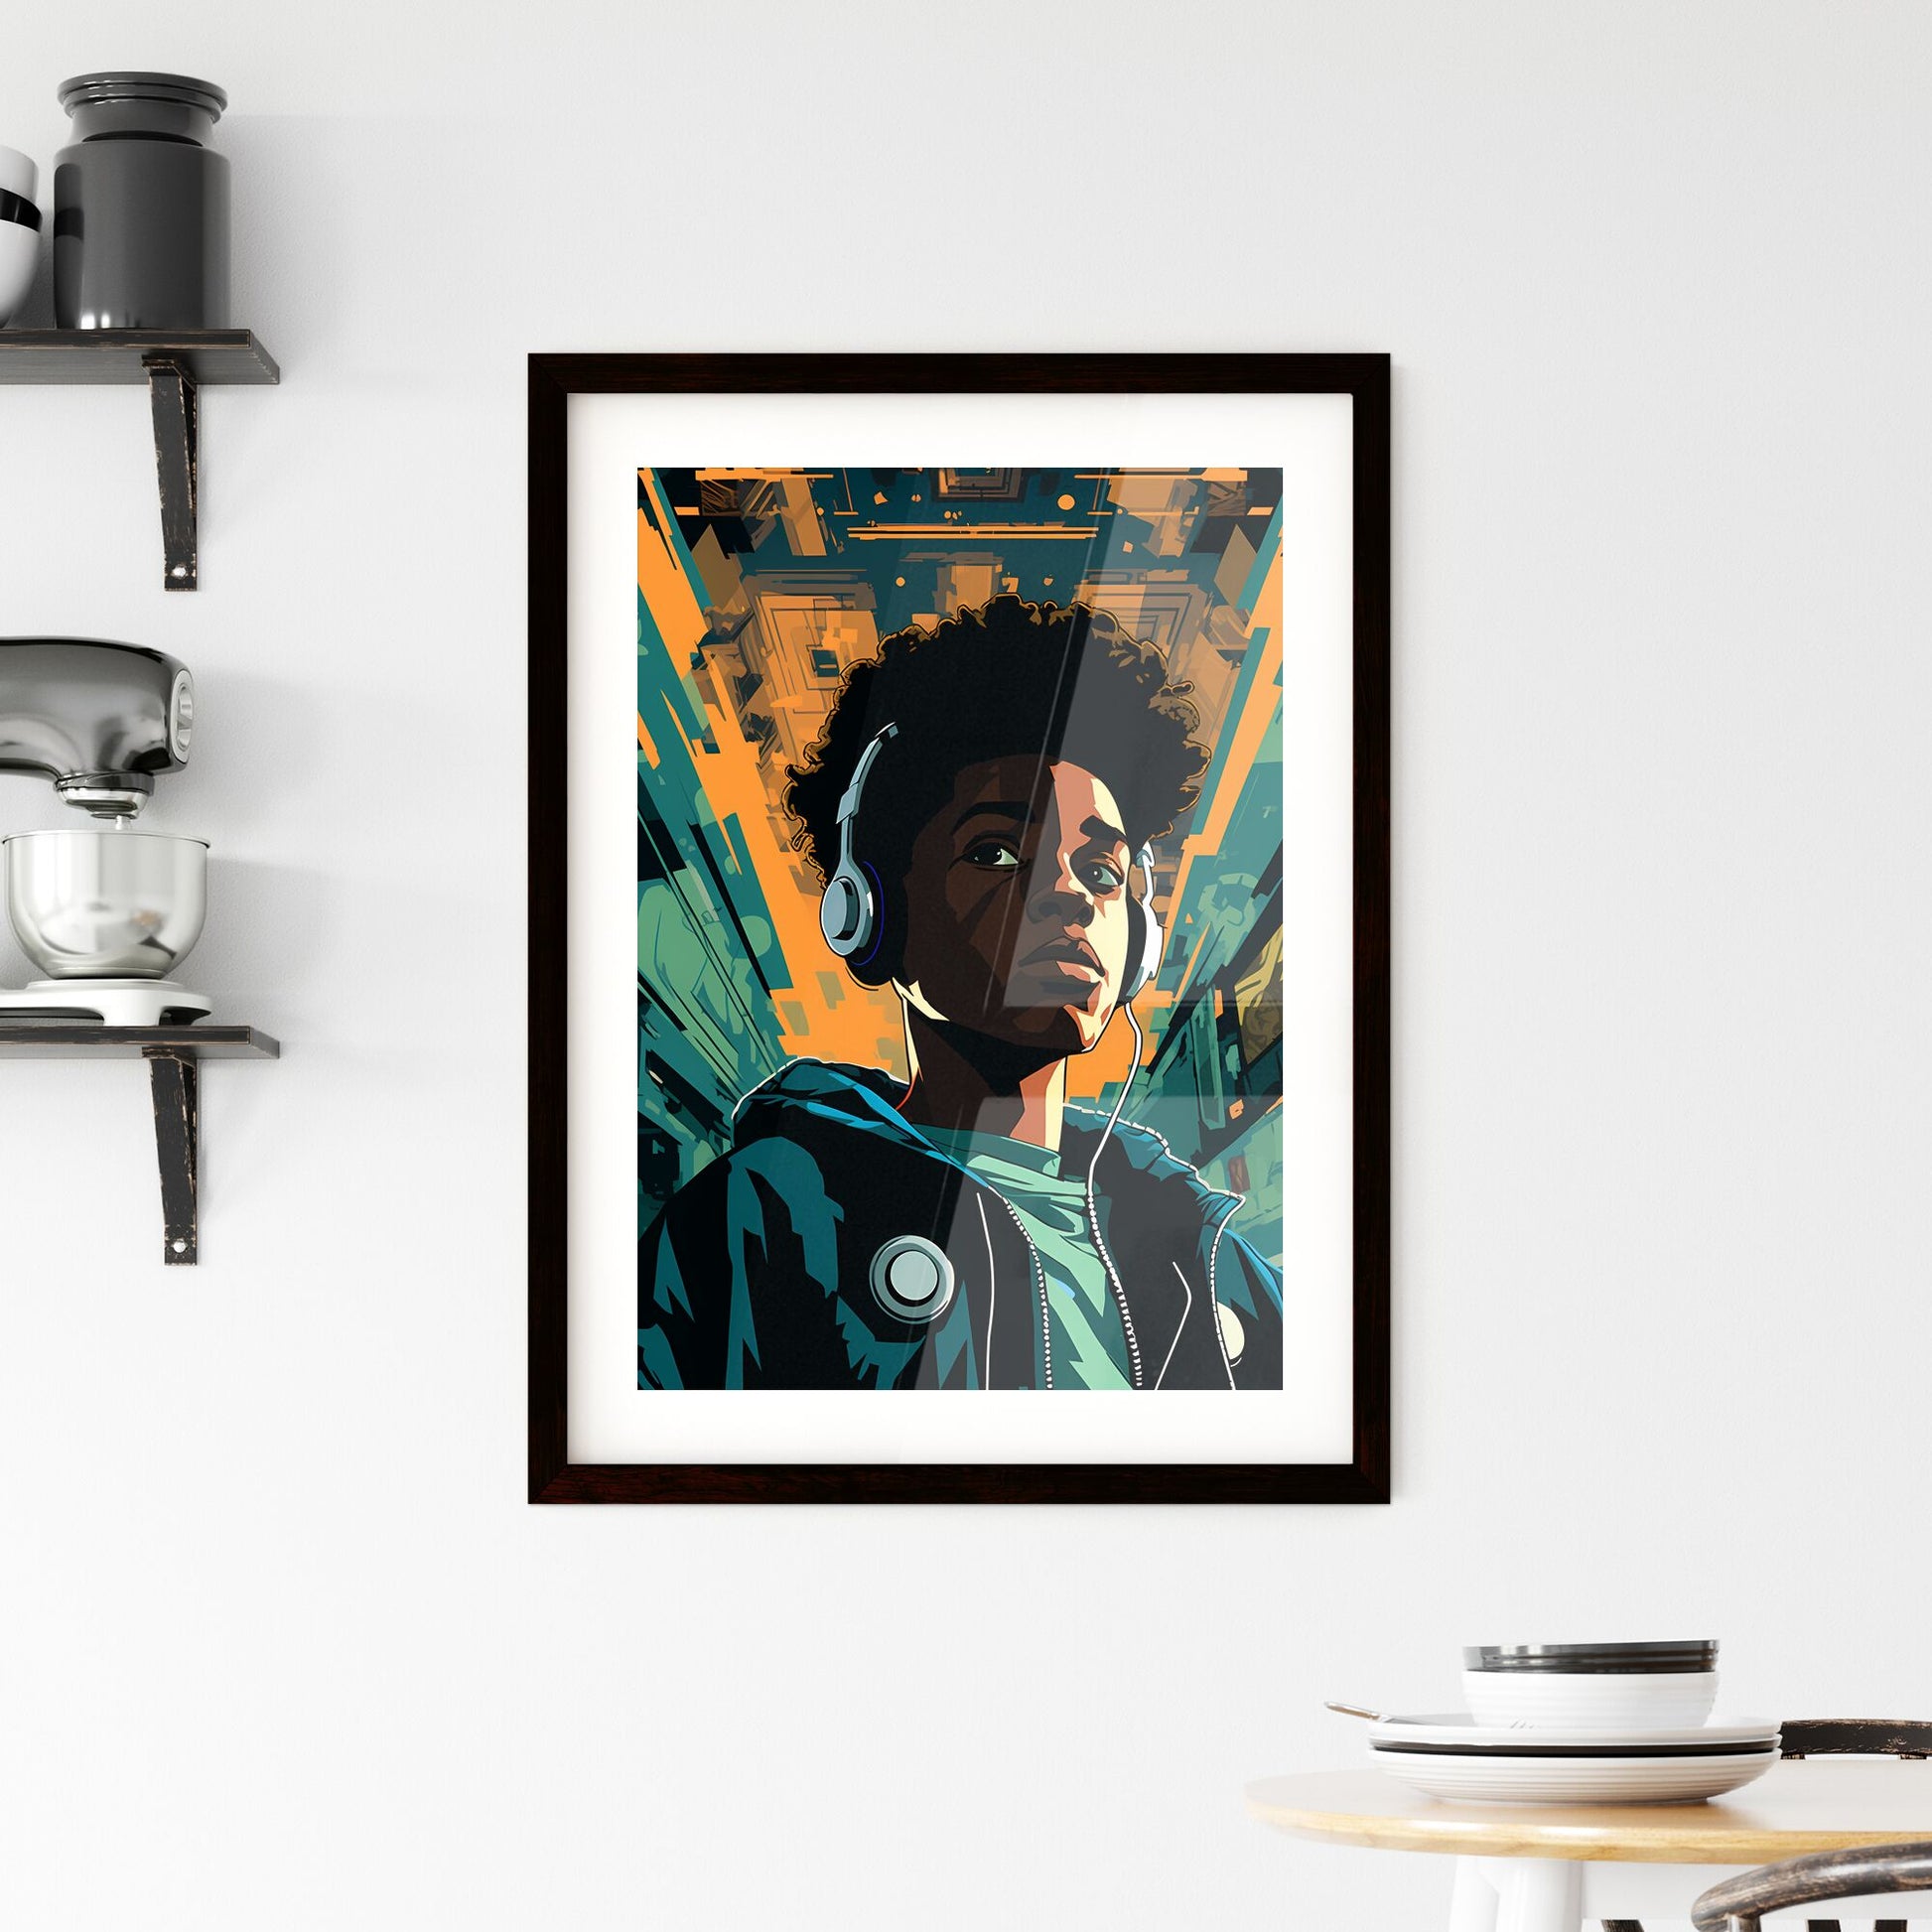 A Poster of a black teenager listening - A Boy Wearing Headphones And Looking Up Default Title